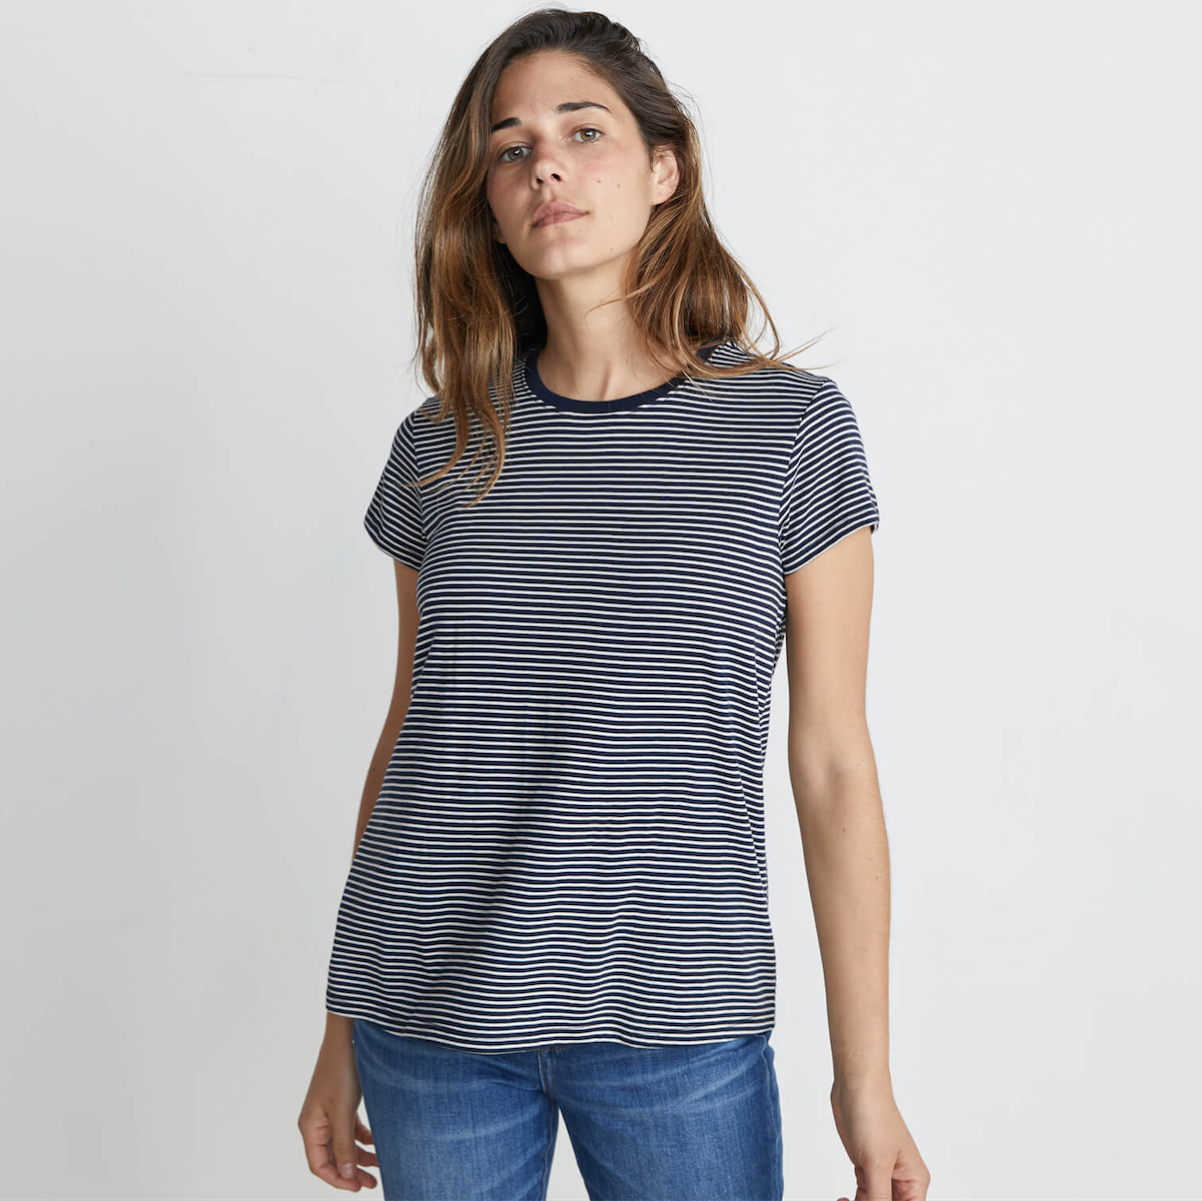 Shop Marine Layer's Perfectly Soft T-Shirts | Who What Wear UK